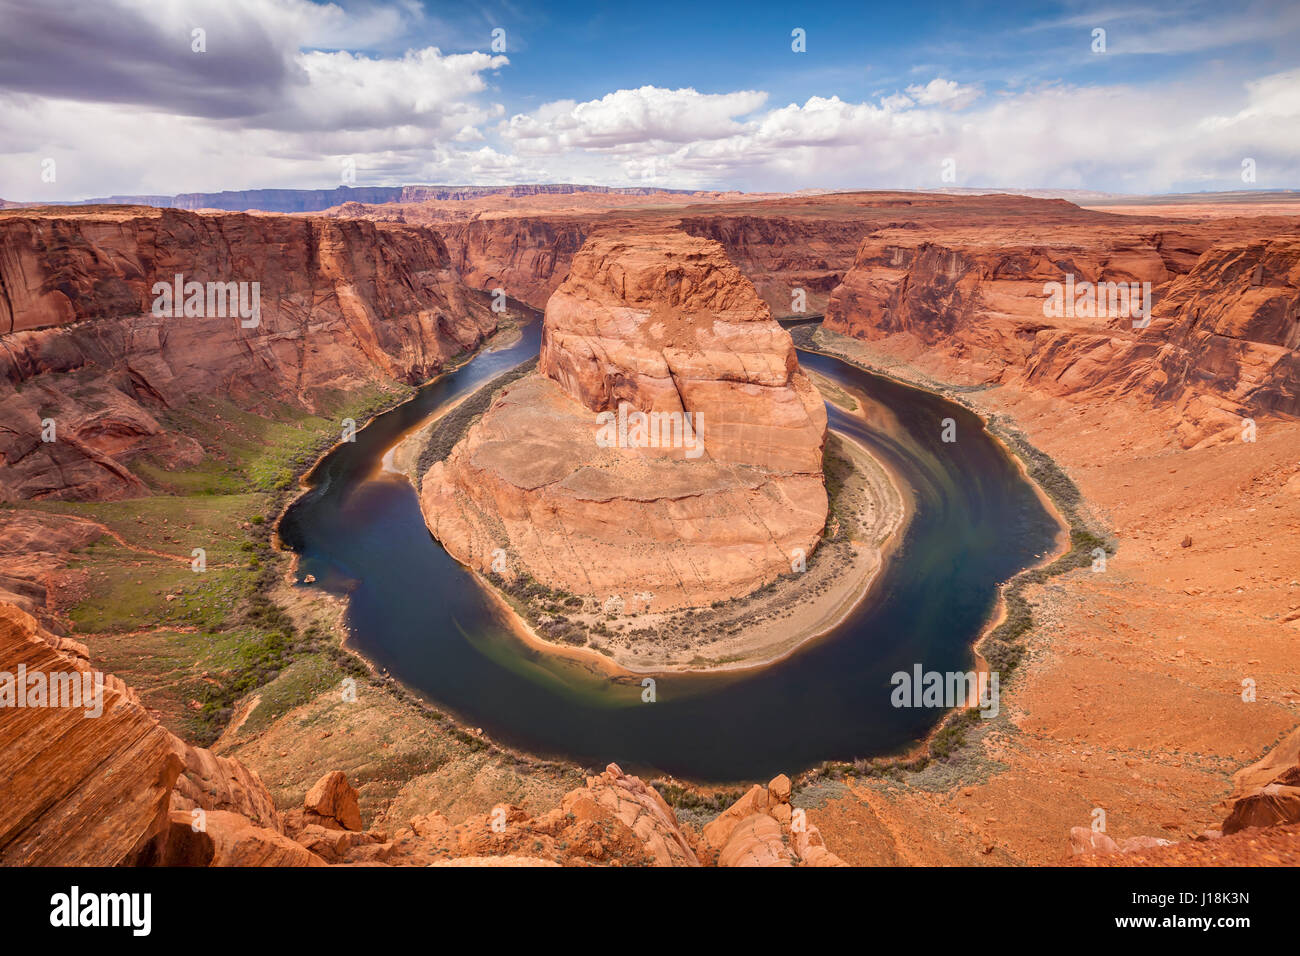 Horseshoe Bend, a meander of the Colorado River in the Glen Canyon area of Arizona. Stock Photo